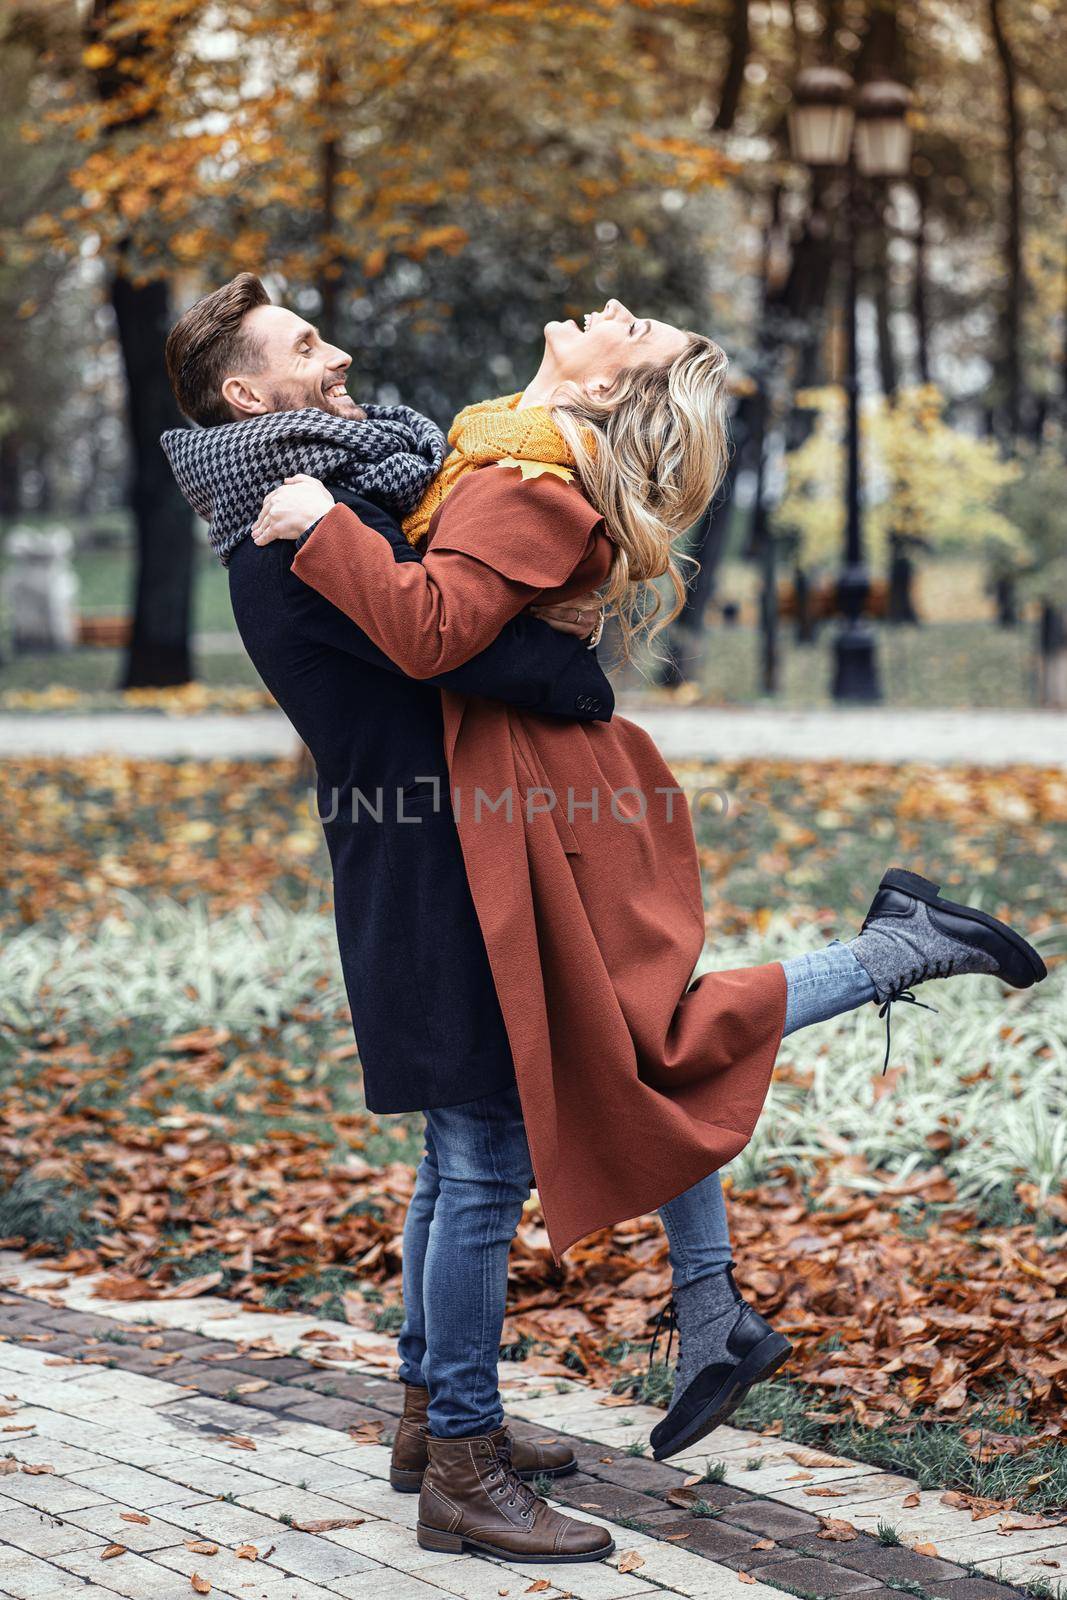 Man lifting a girl hugged laughing in the autumn park with a cute hug. Outdoor shot of a young couple in love having great time having a hug in a autumn park. Close up full length.Tinted image.